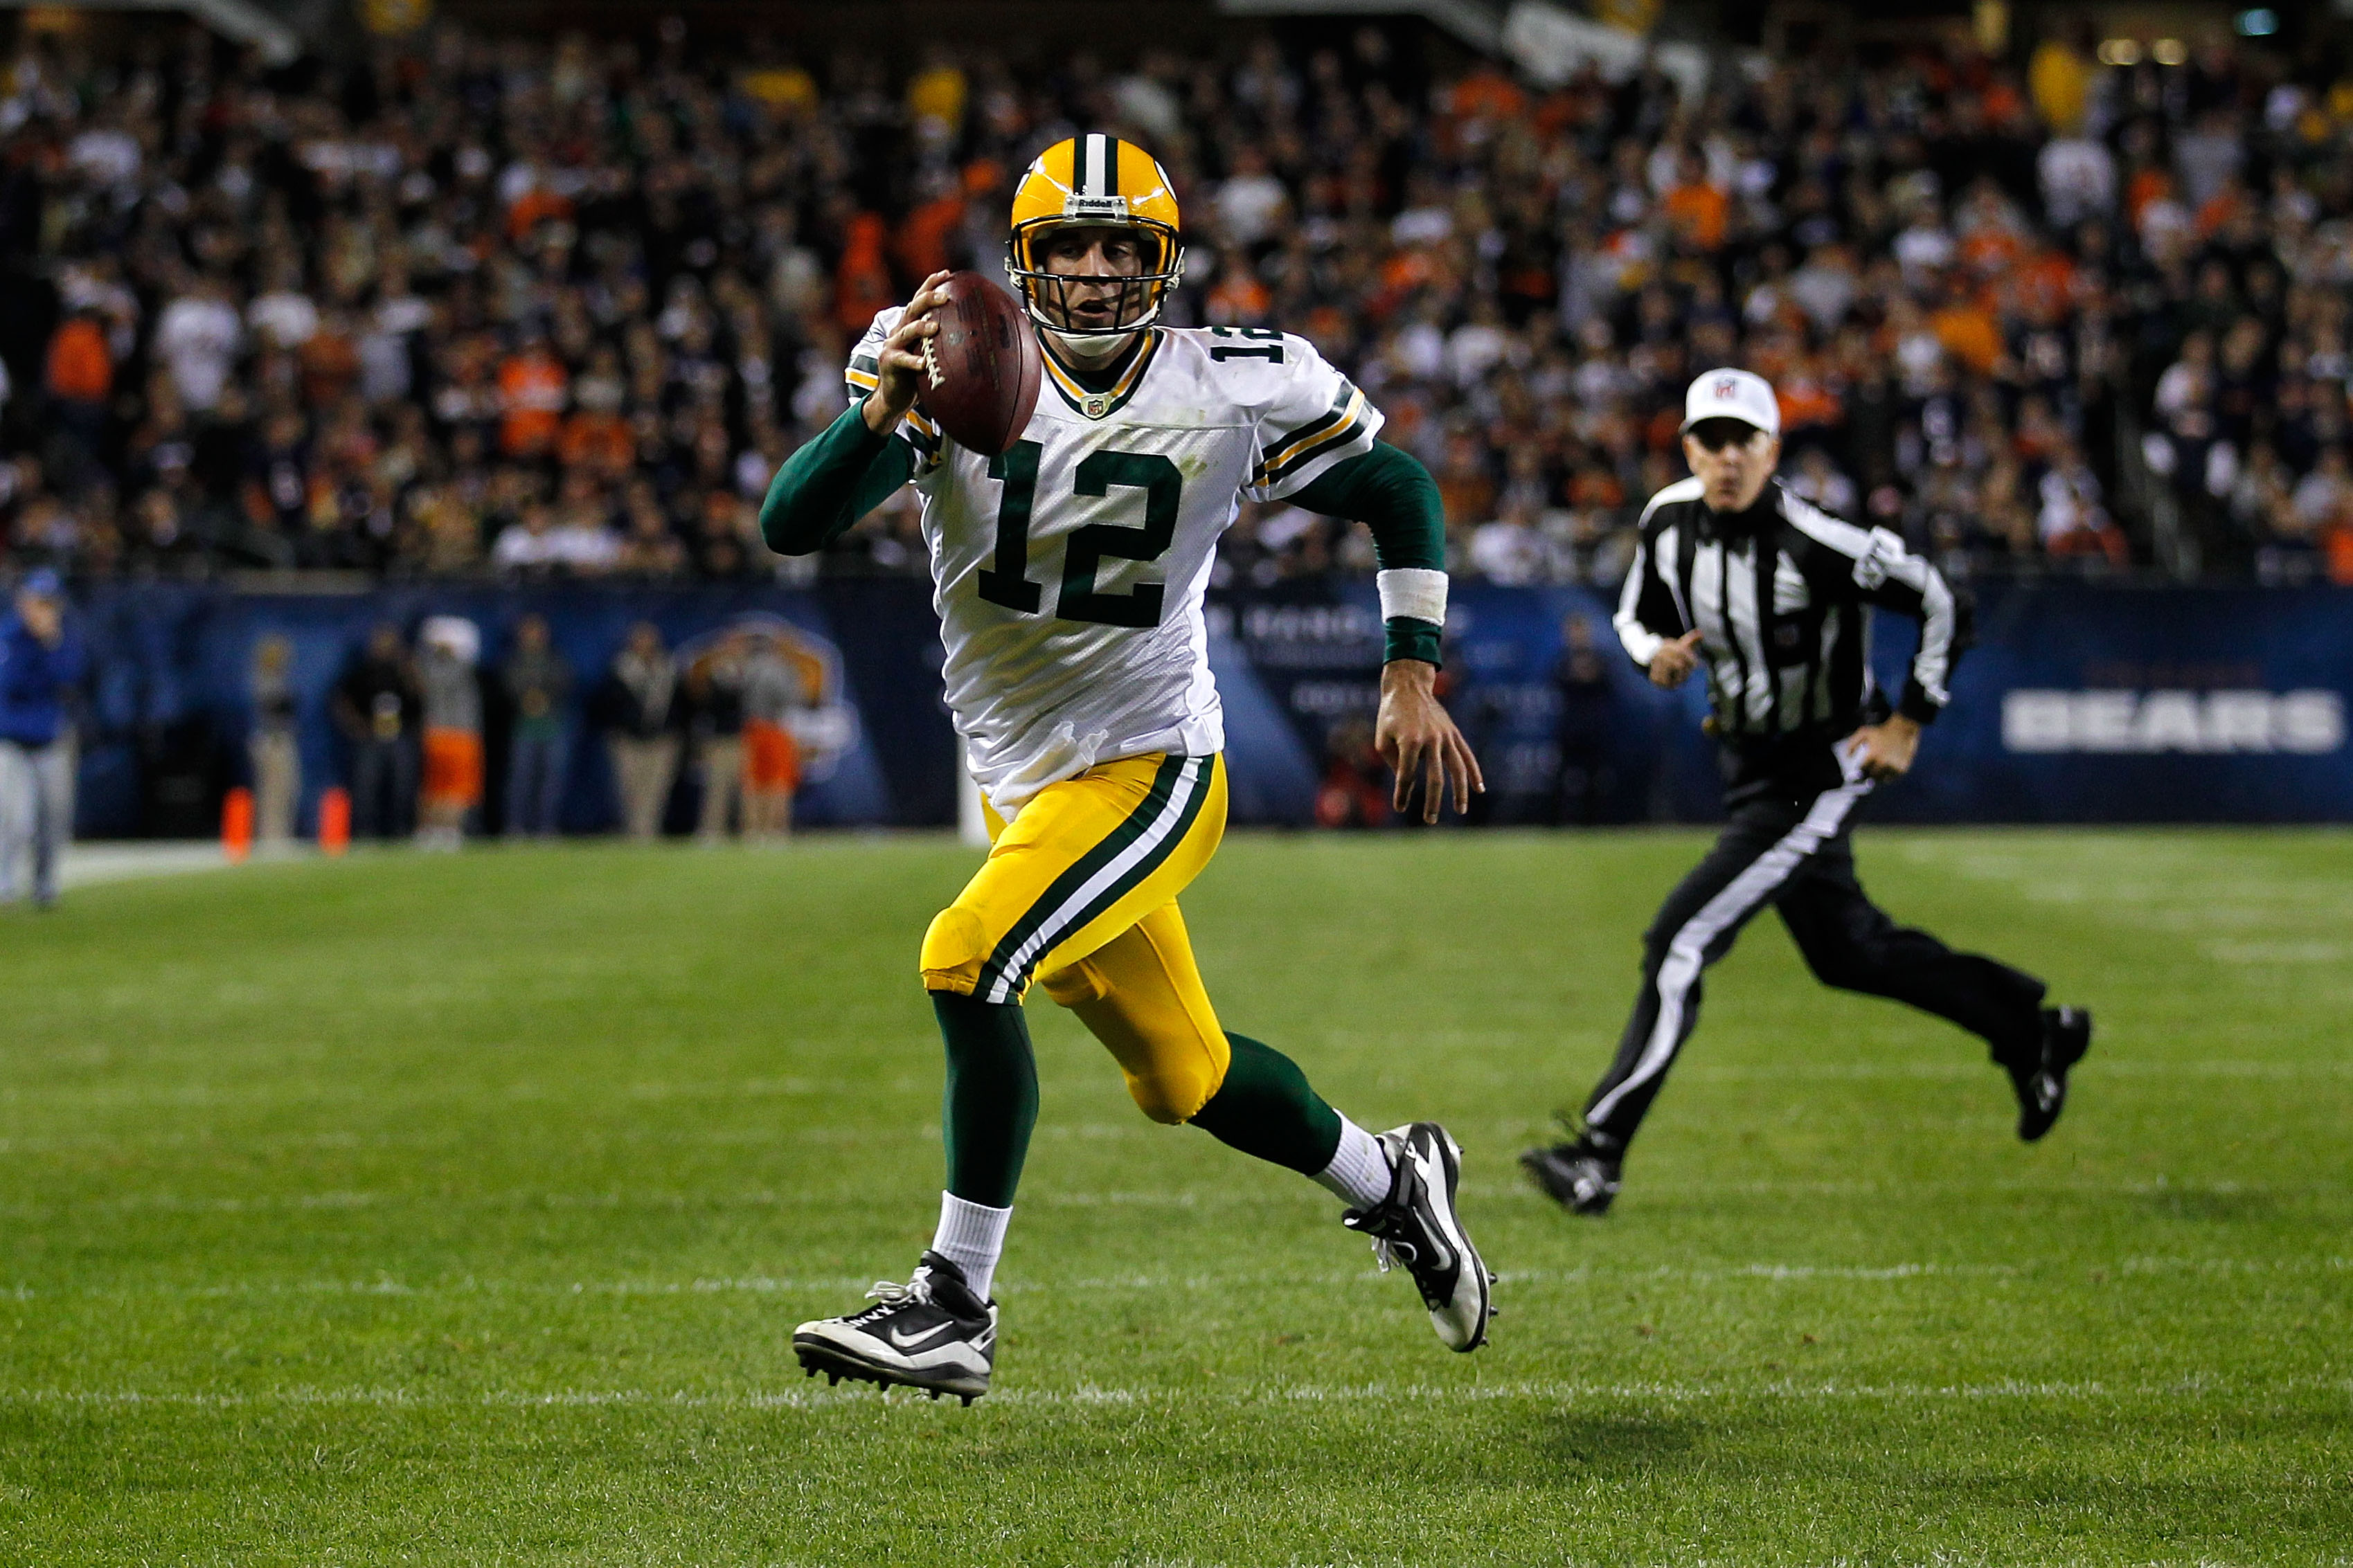 Rodgers has the talent to be an explosive player. But Green Bay seems ill-prepared for life after Grant right now.